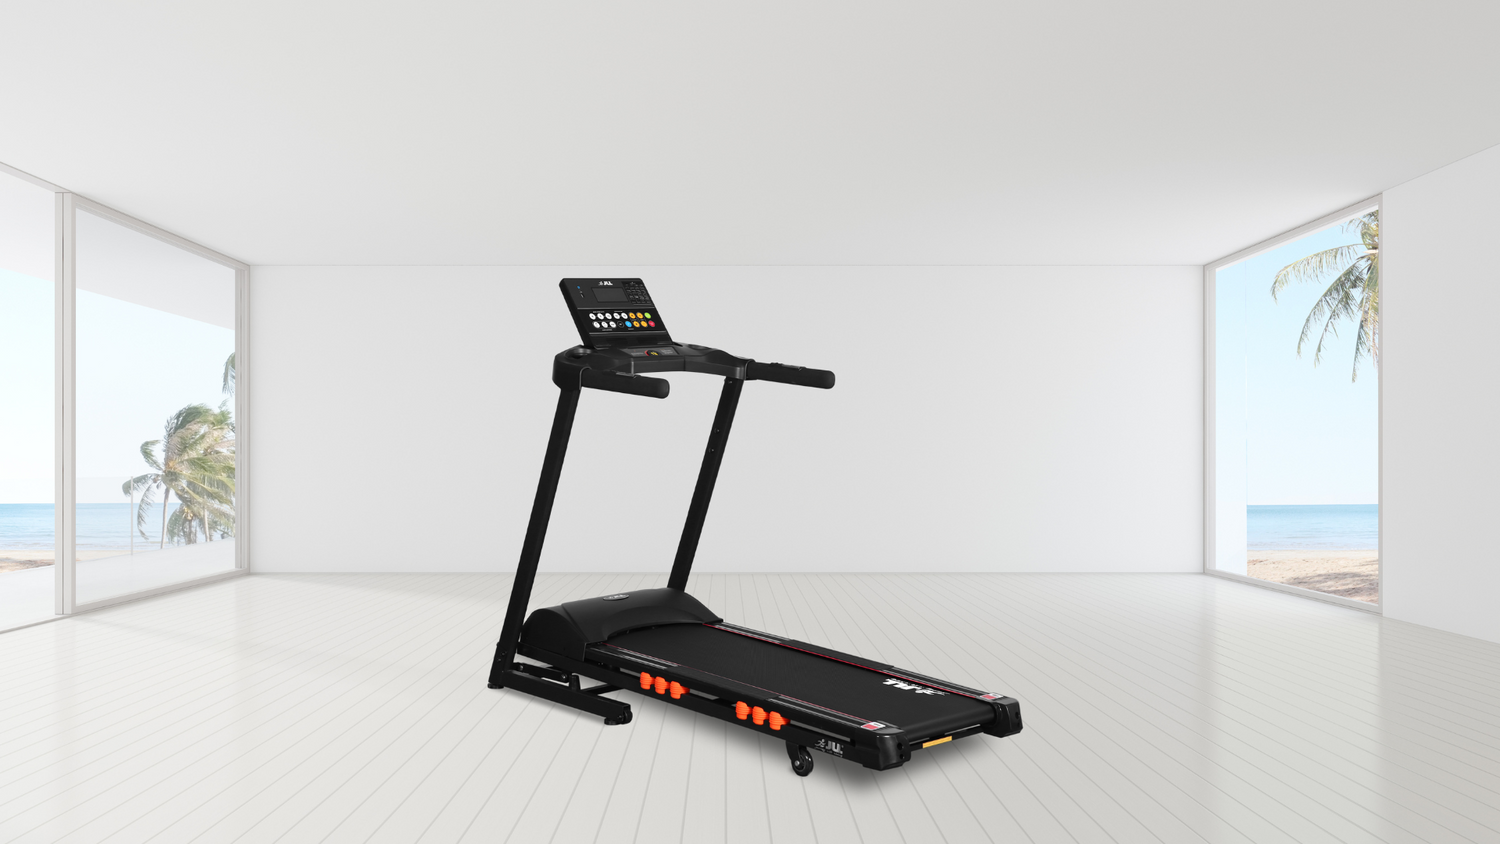 5 Treadmill Workouts – Add some variety to your runs